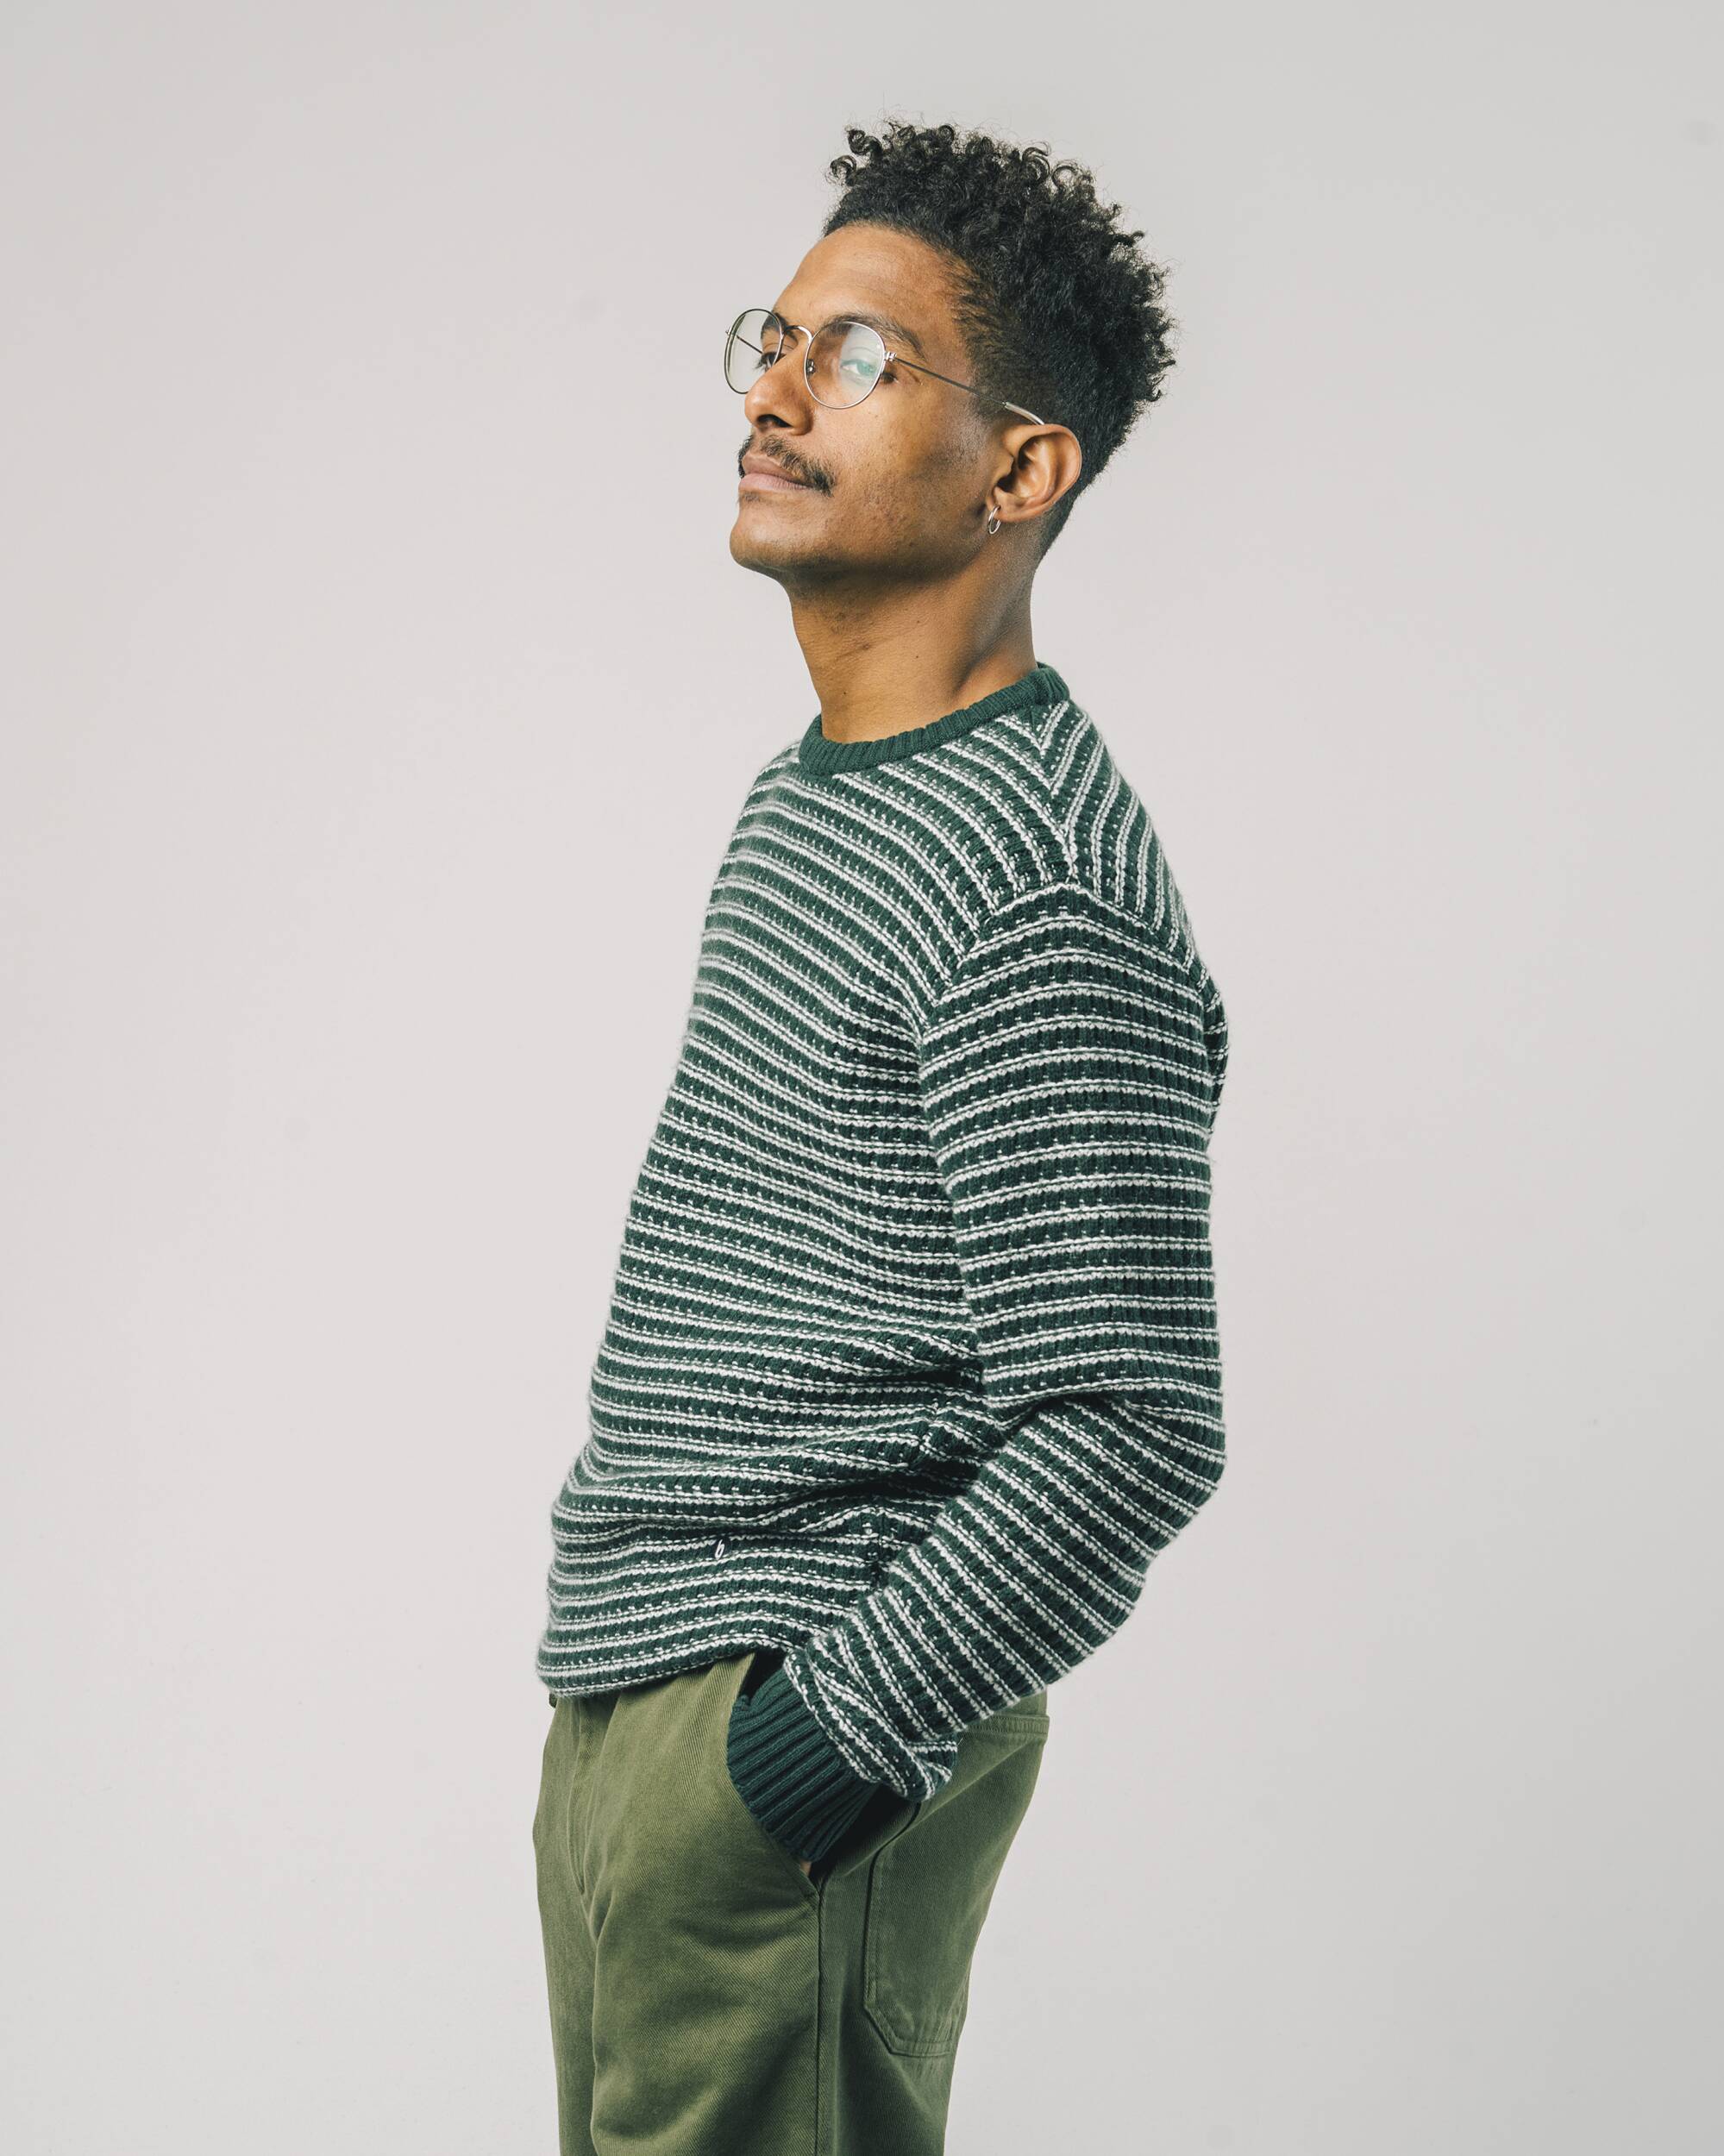 Striped sweater navy in dark, green and white made from recycled materials such as cashmere and wool from Brava Fabrics